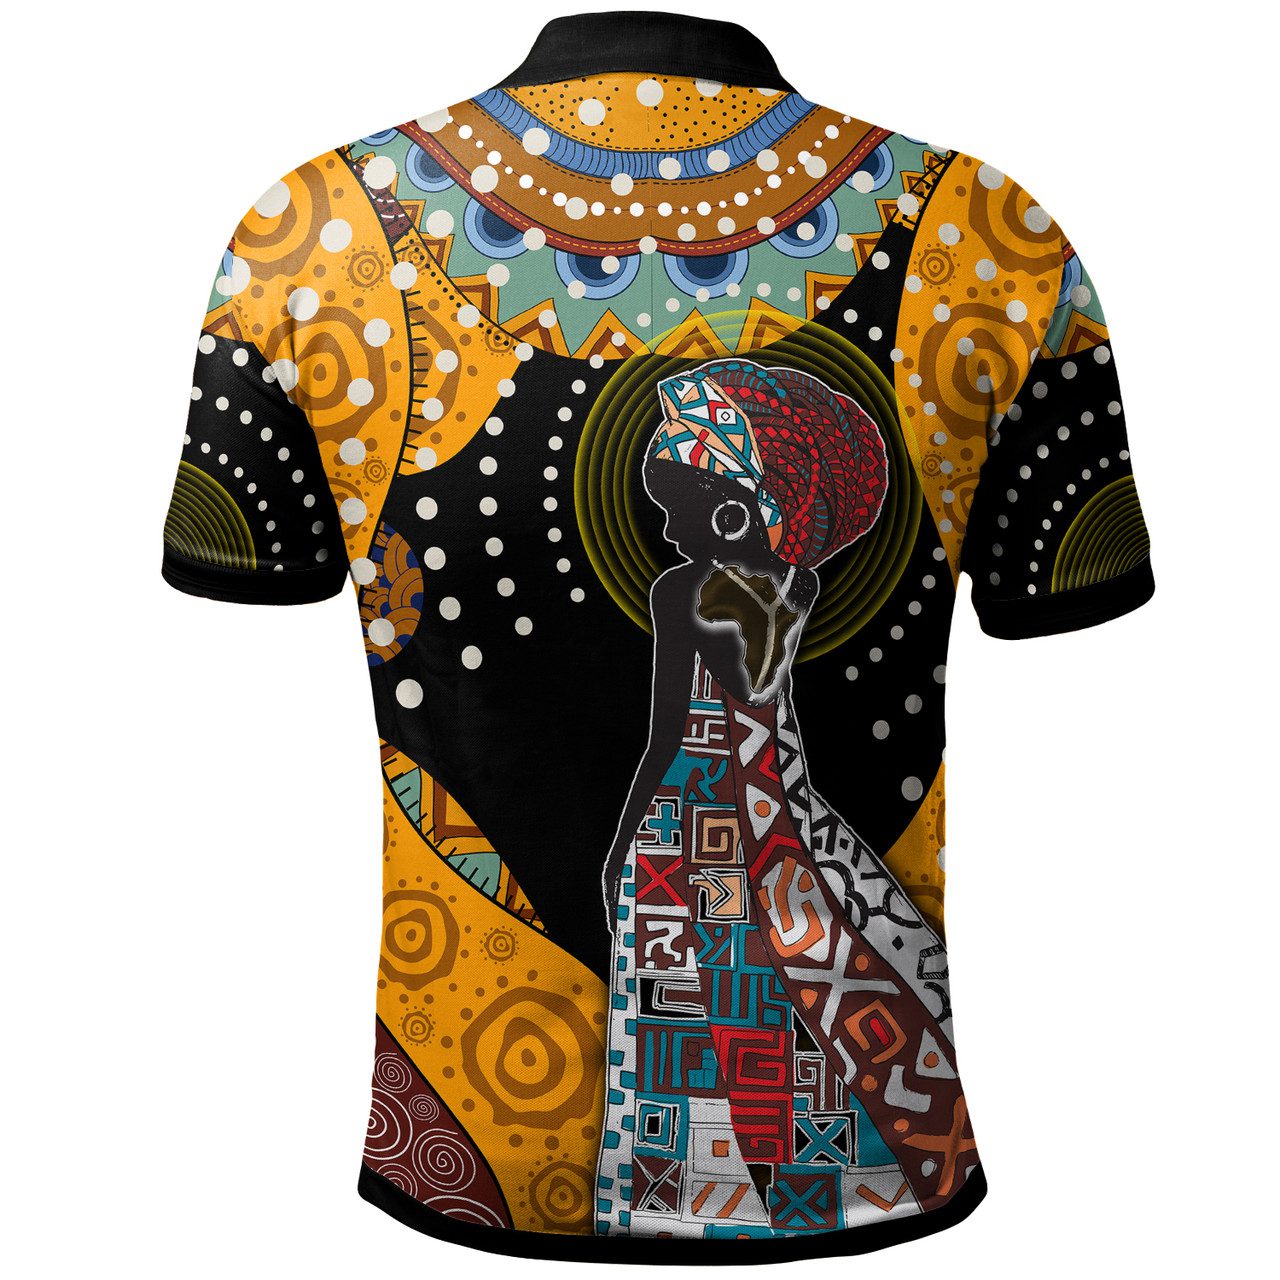 African Woman Polo Shirt – Custom African Women With African Pattern Polo Shirt